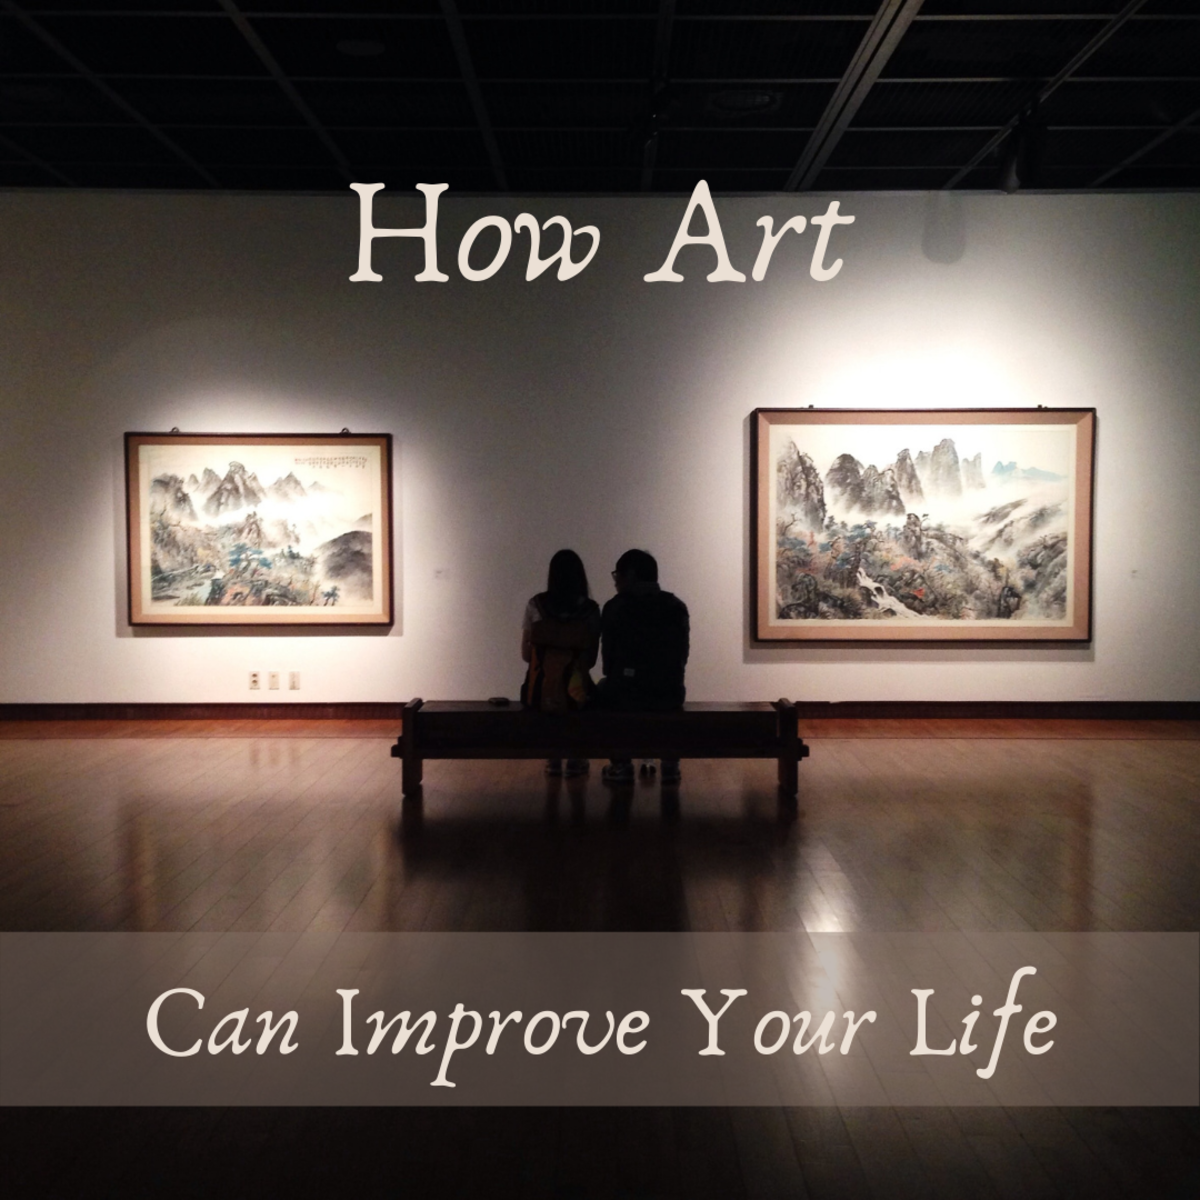 Admiring artworks stimulates the brain in a way that's similar to when we fall in love.